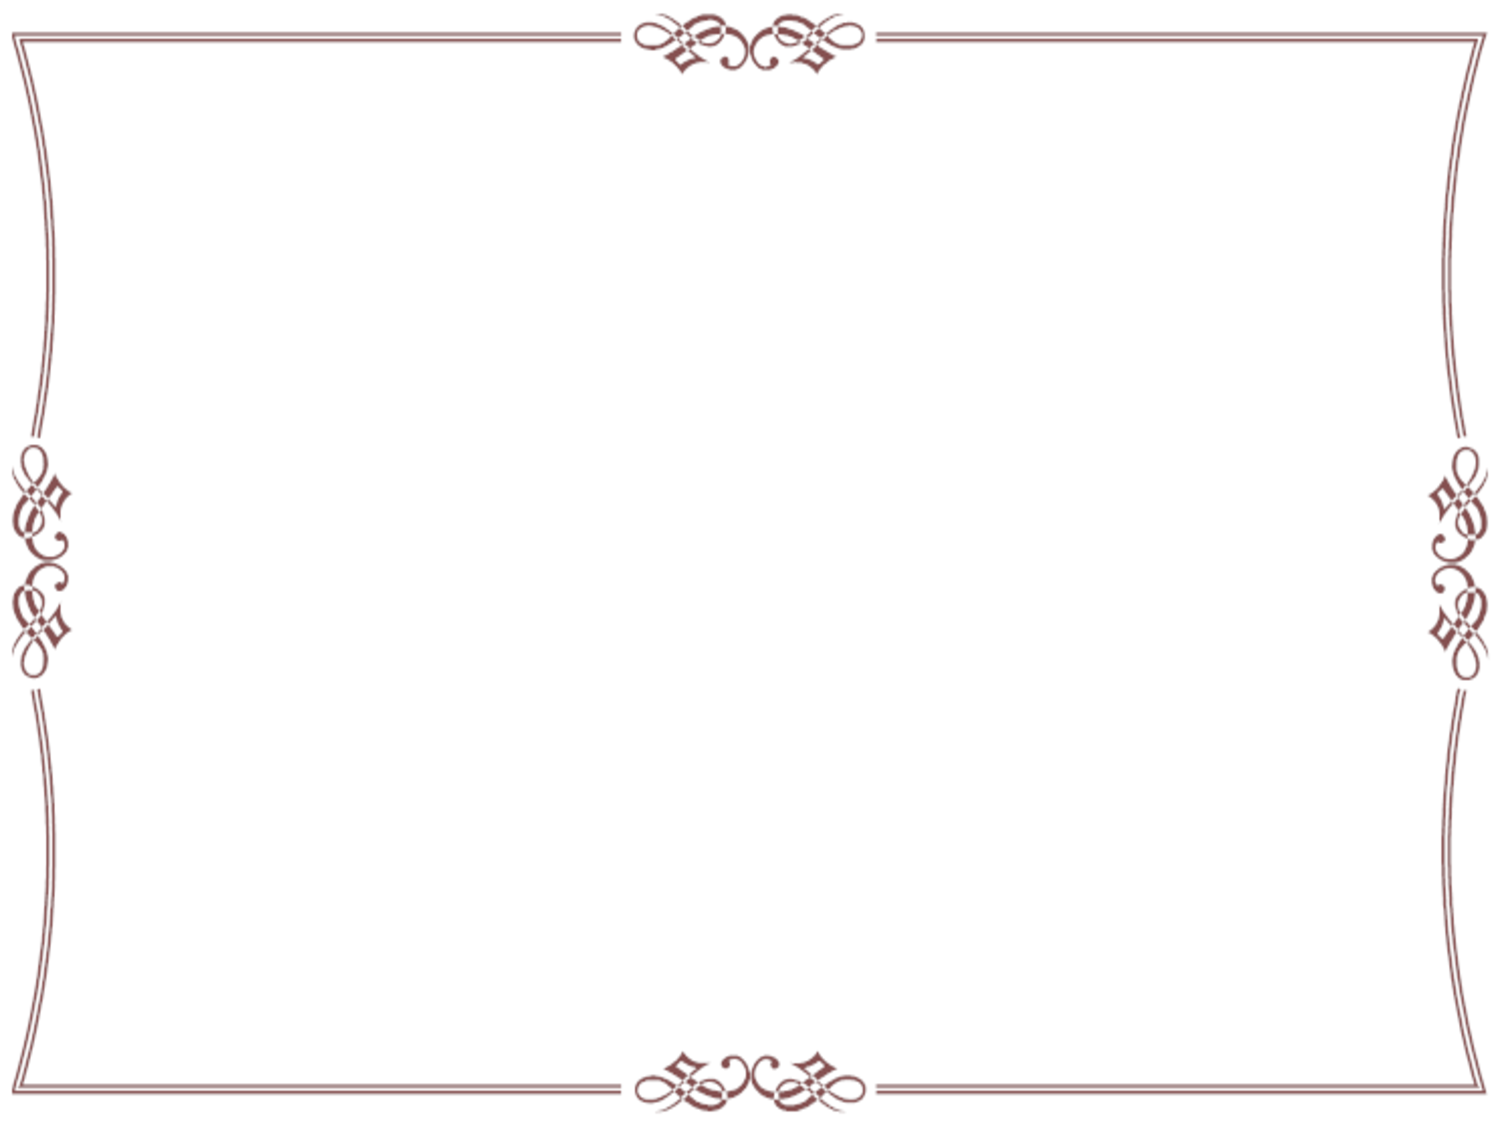 free clipart certificate borders - photo #23